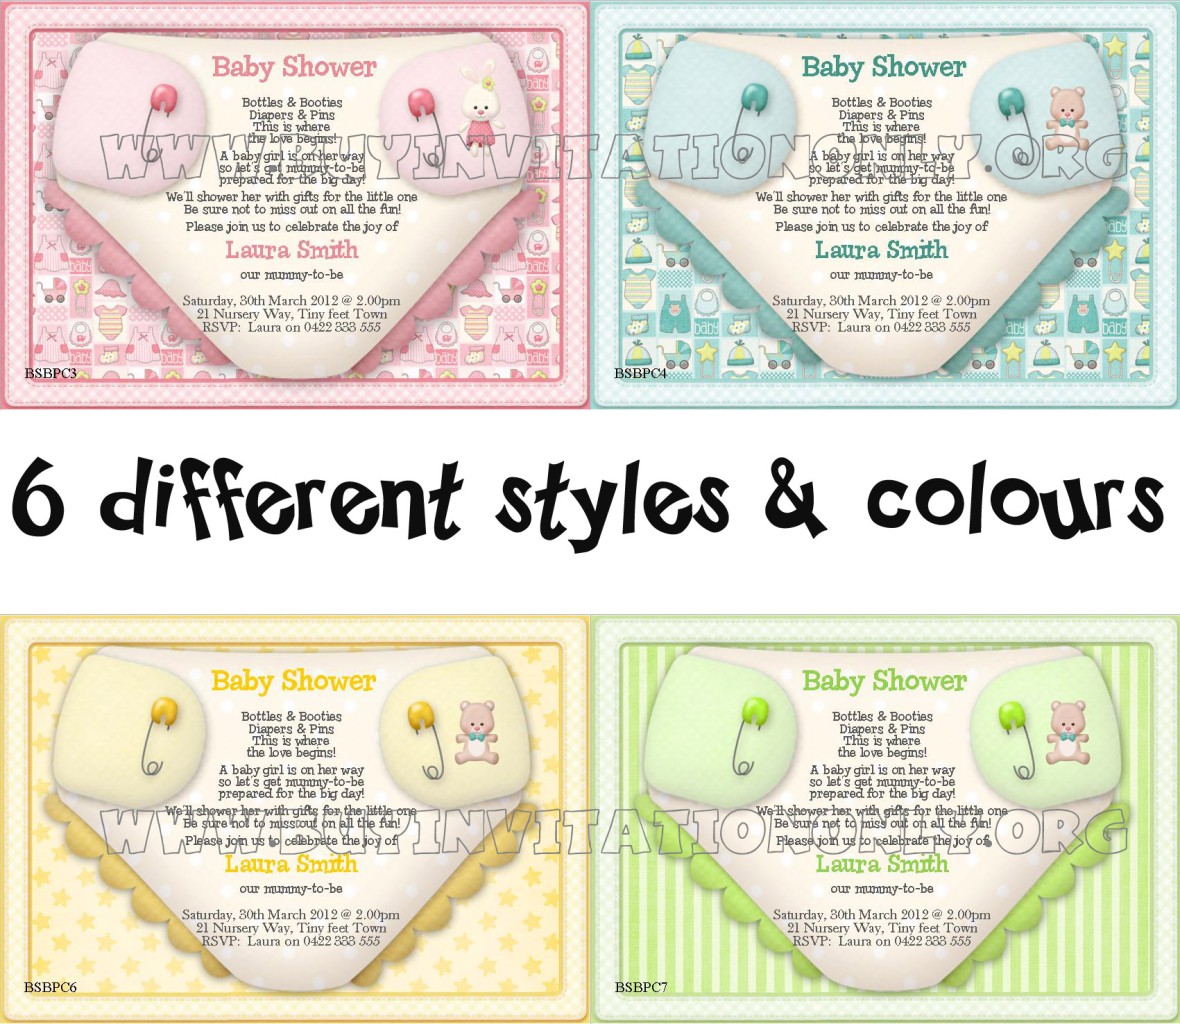 Baby-Shower-Diaper-Nappy-Invites-Invitations-6-different-Styles ...